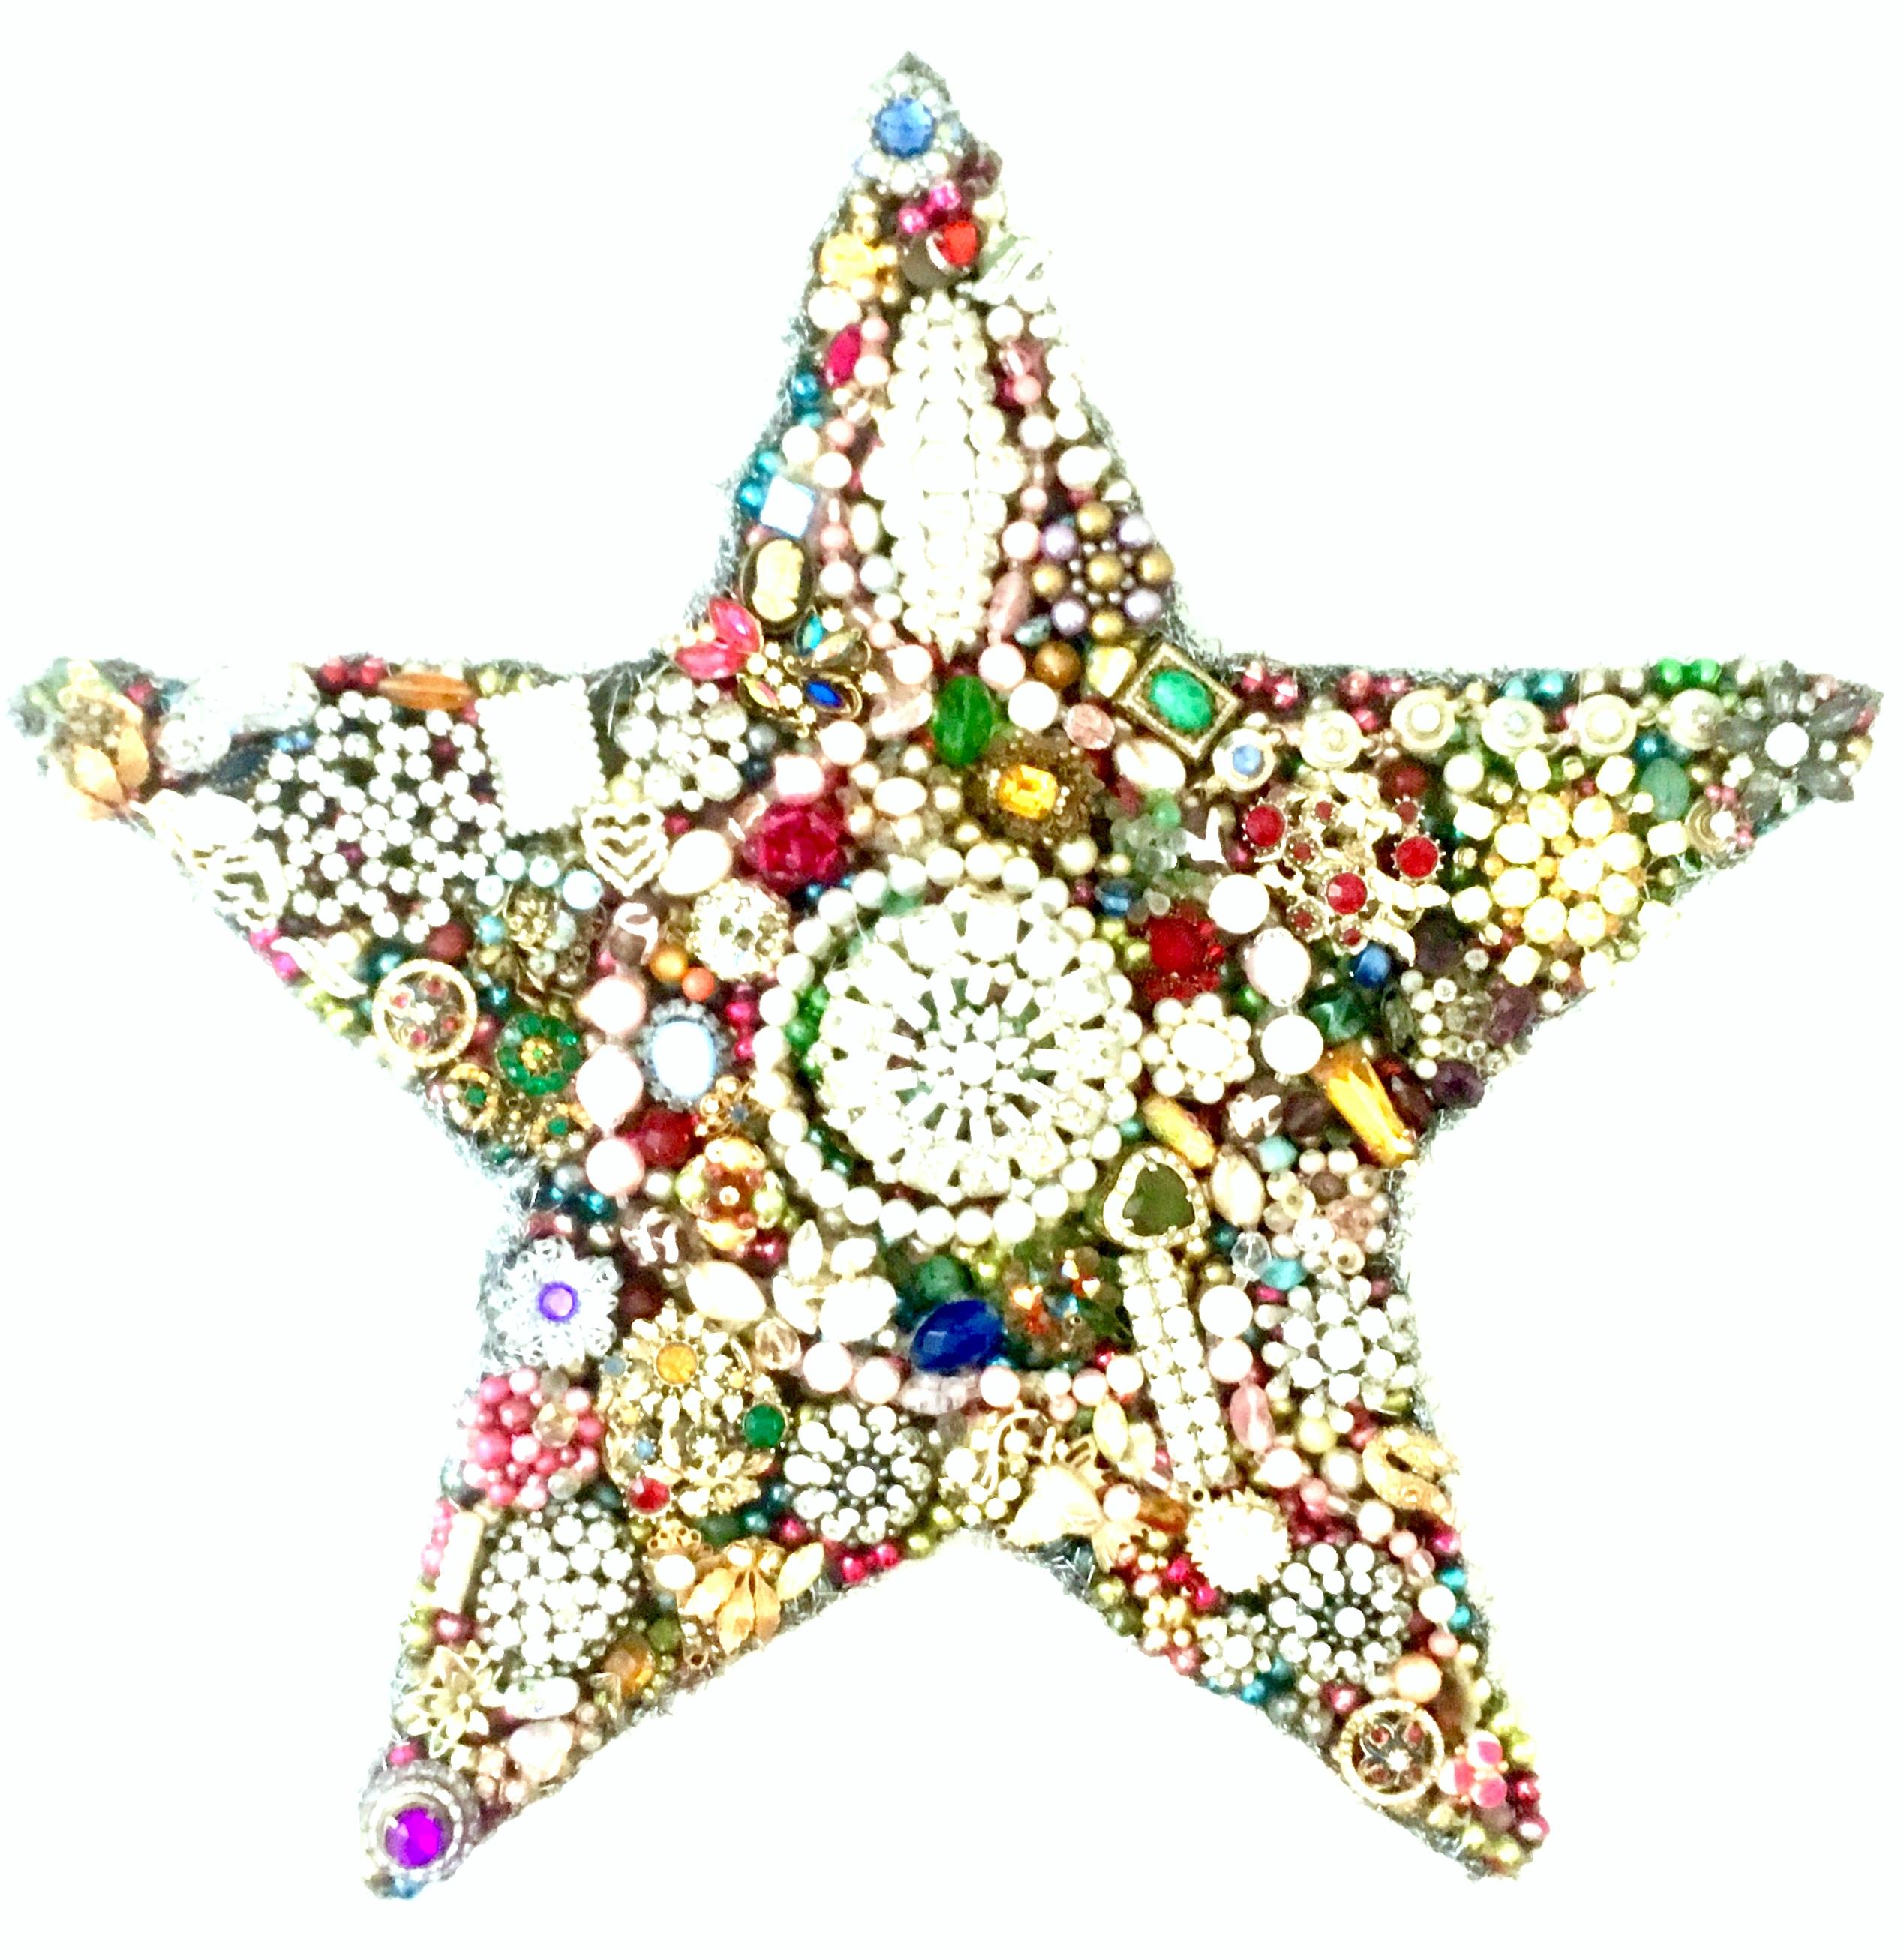 Mid-20th Century Monumental Vintage Costume Jewelry  Hand Crafted & One Of a Kind “Star” Sculpture. Features 100’s of repurposed vintage costume jewelry pieces hand applied to an abstract star sculpture. The underside is backed in steel with wood